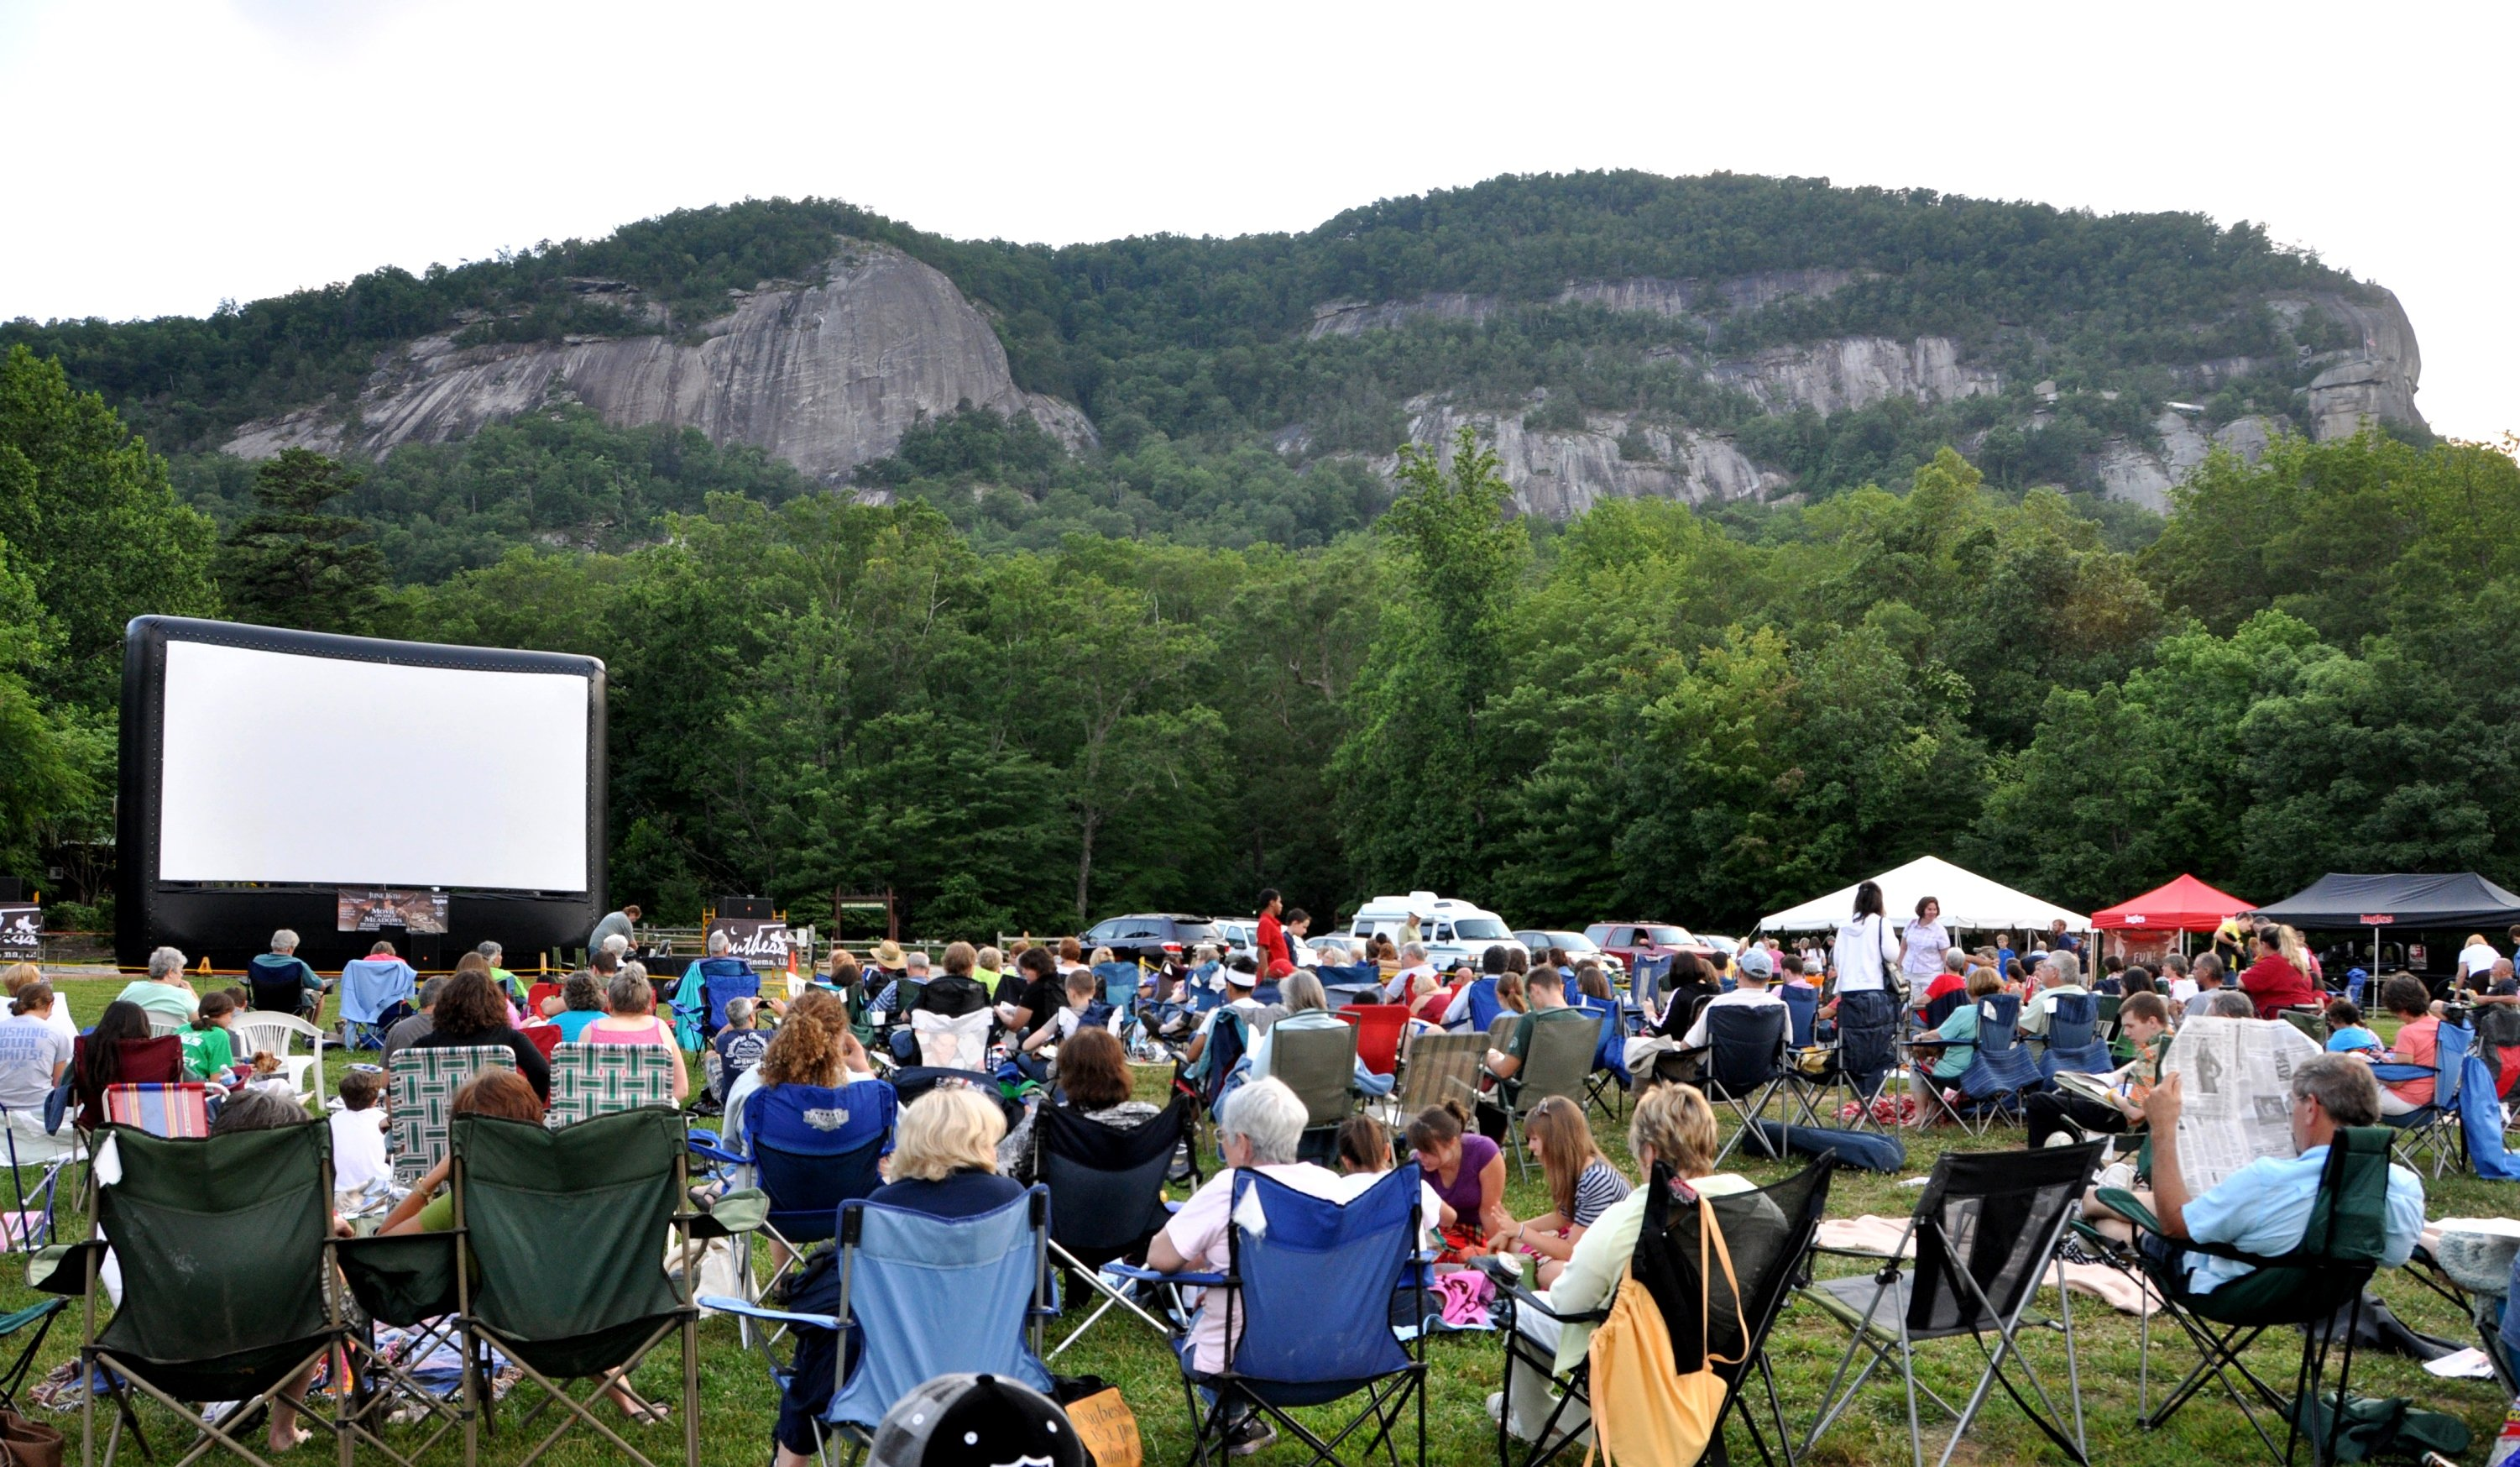 Chimney Rock Park will show "The Last of the Mohicans" on The Meadows.